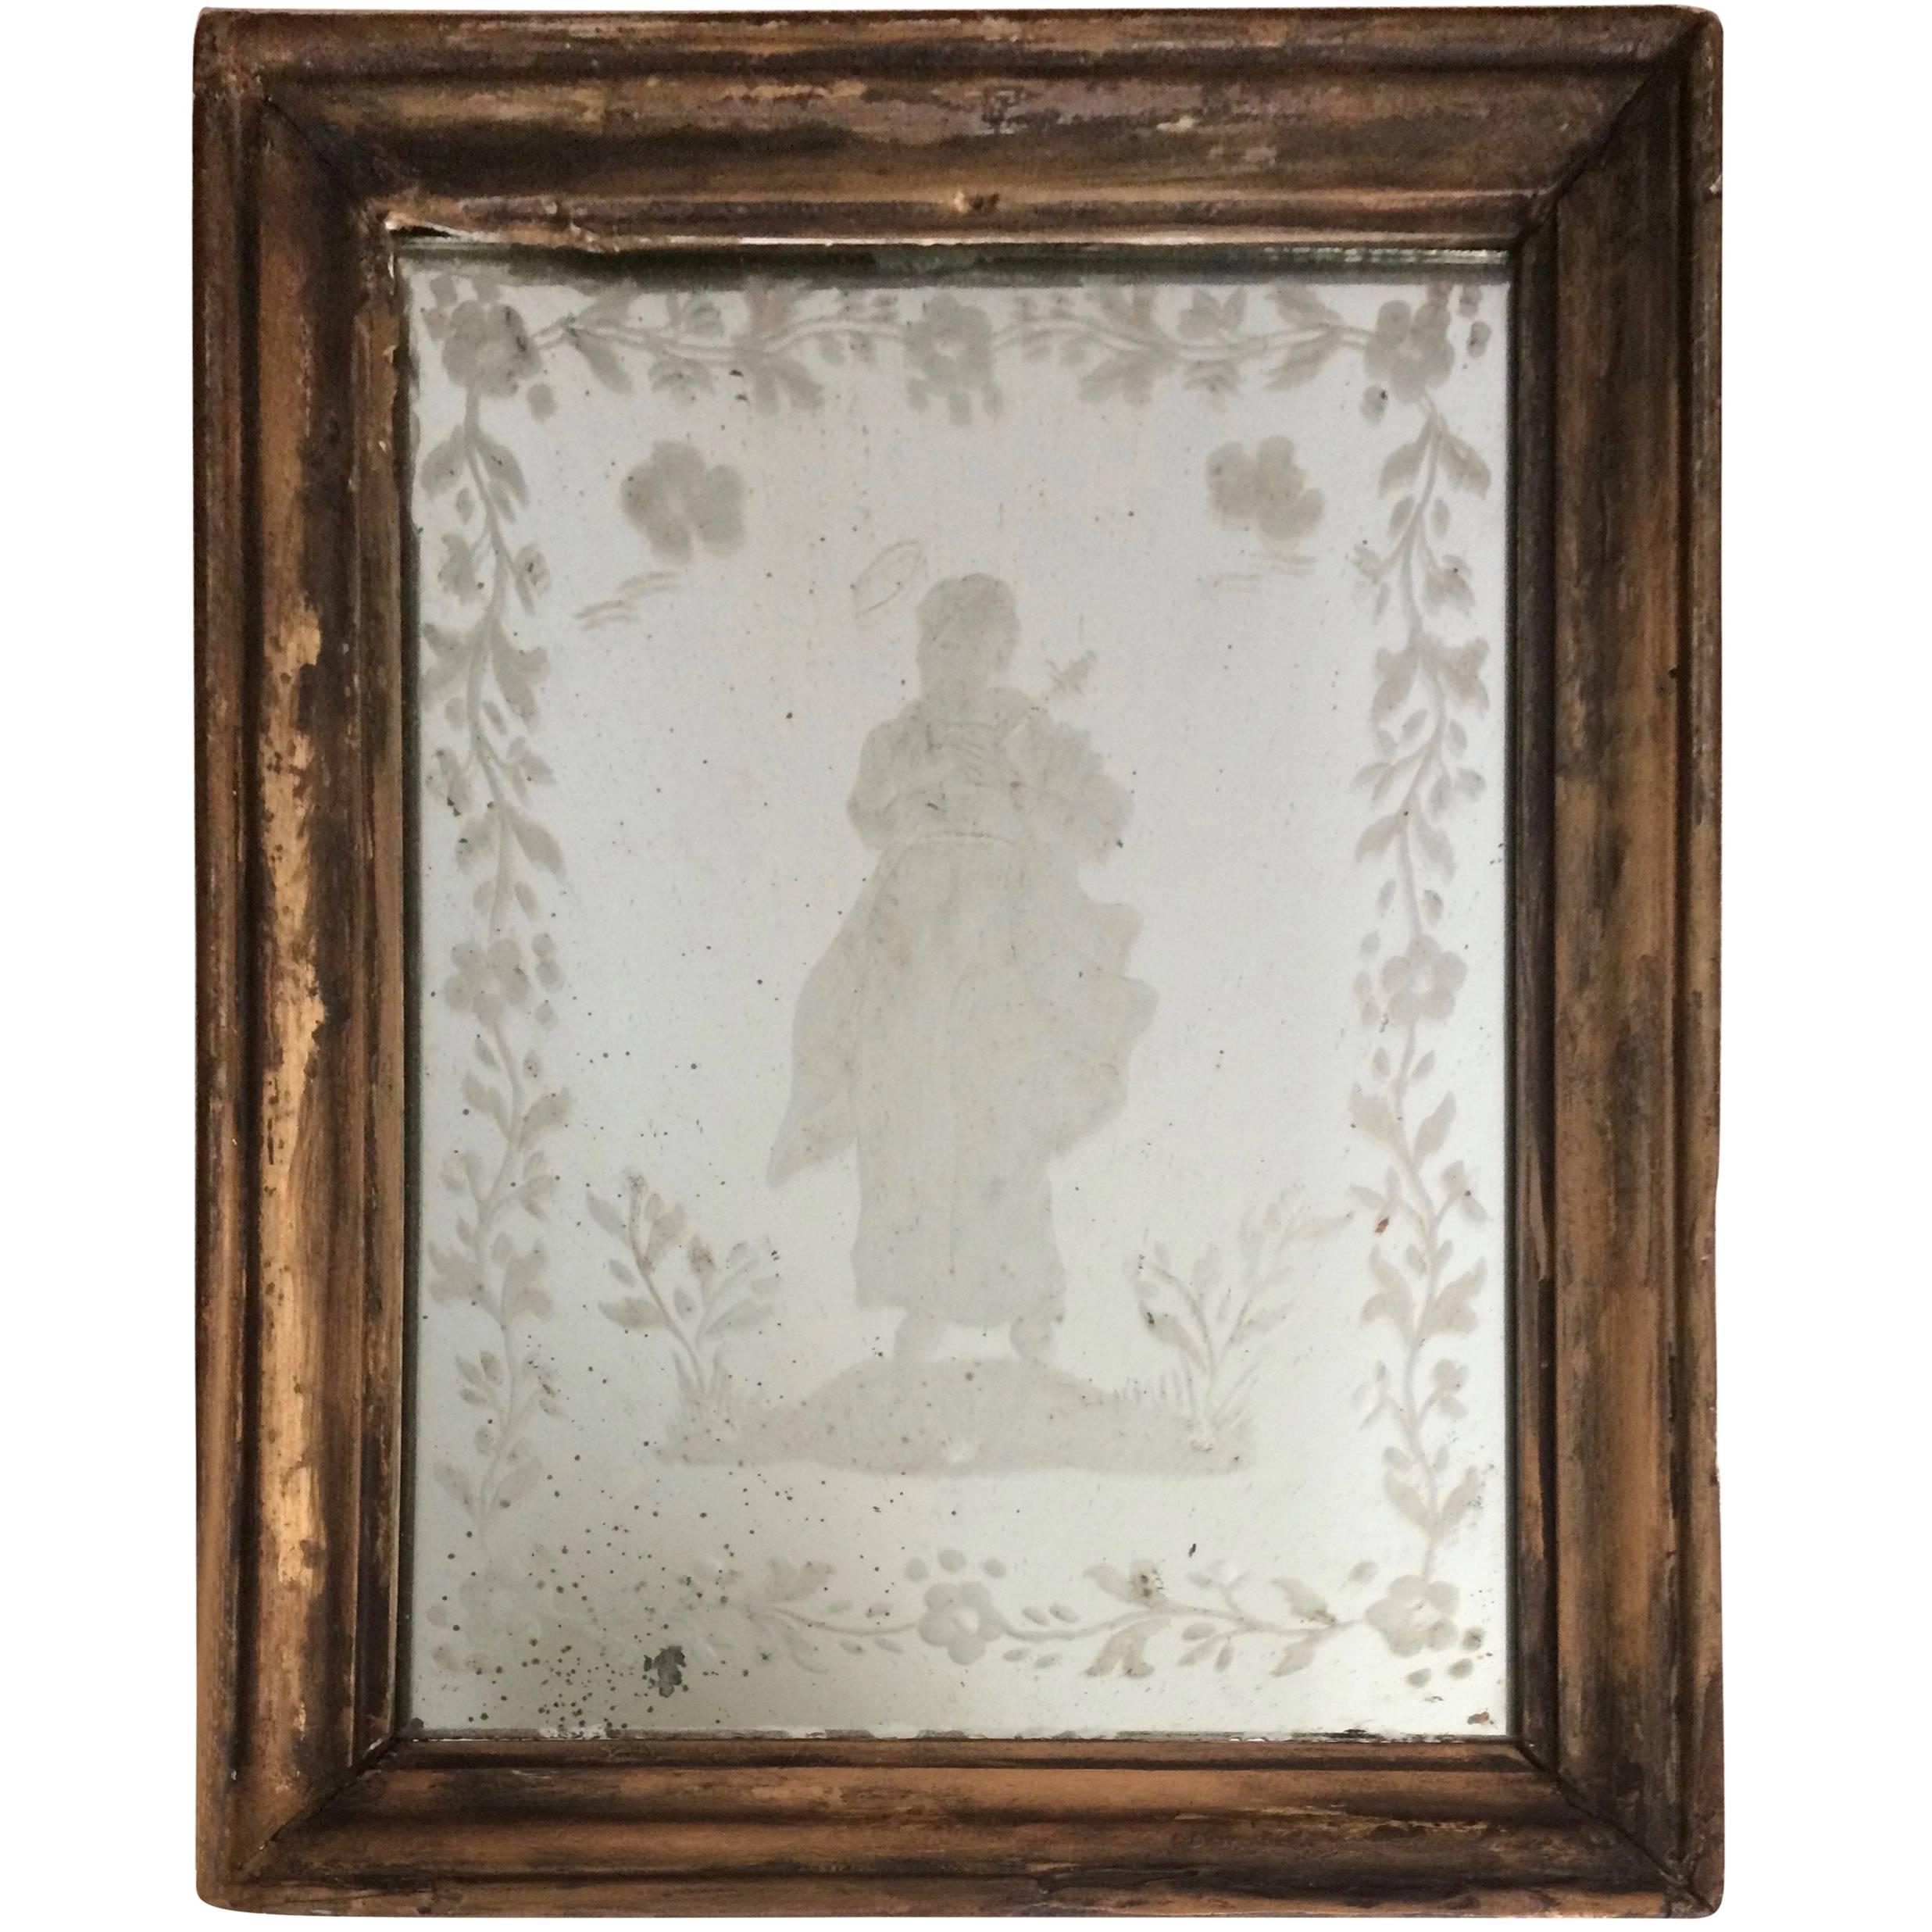 Charming Early Venetian Etched Mirror